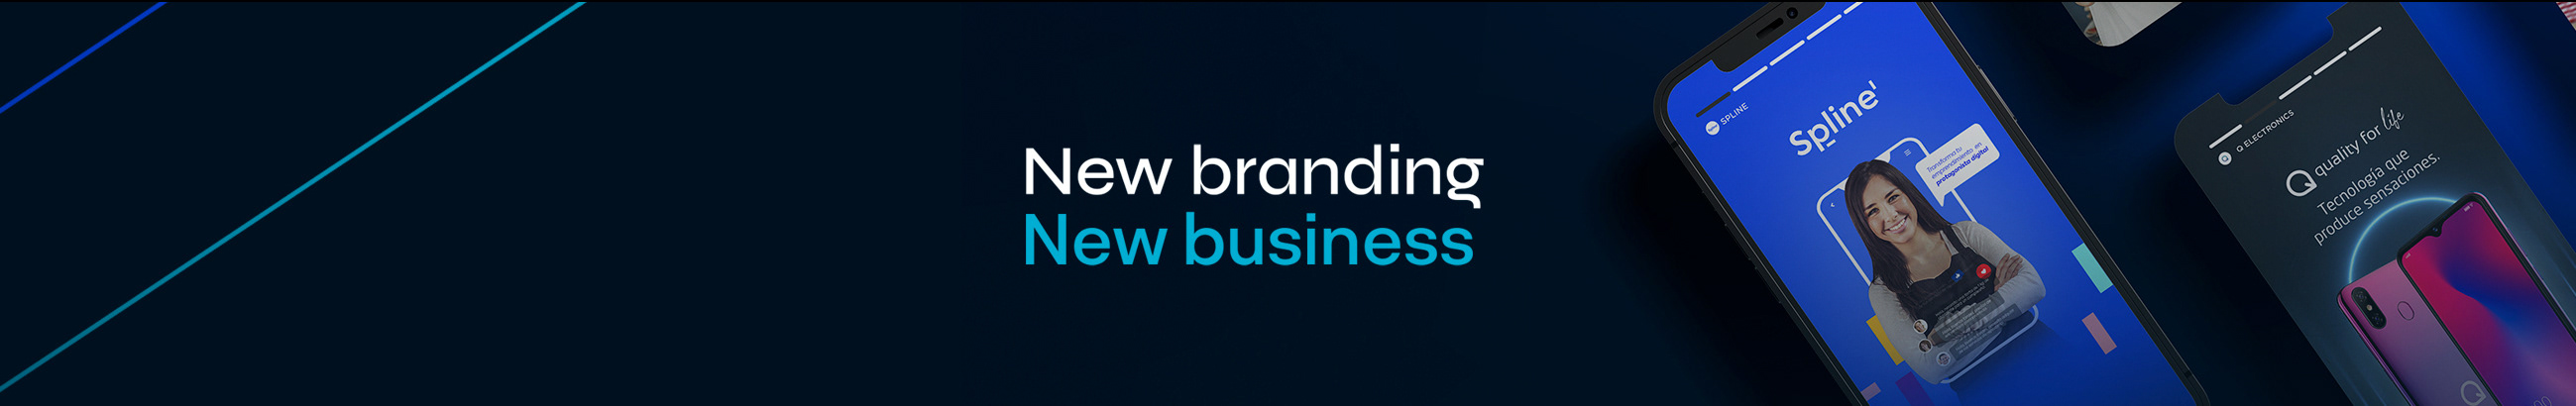 Business Brand's profile banner